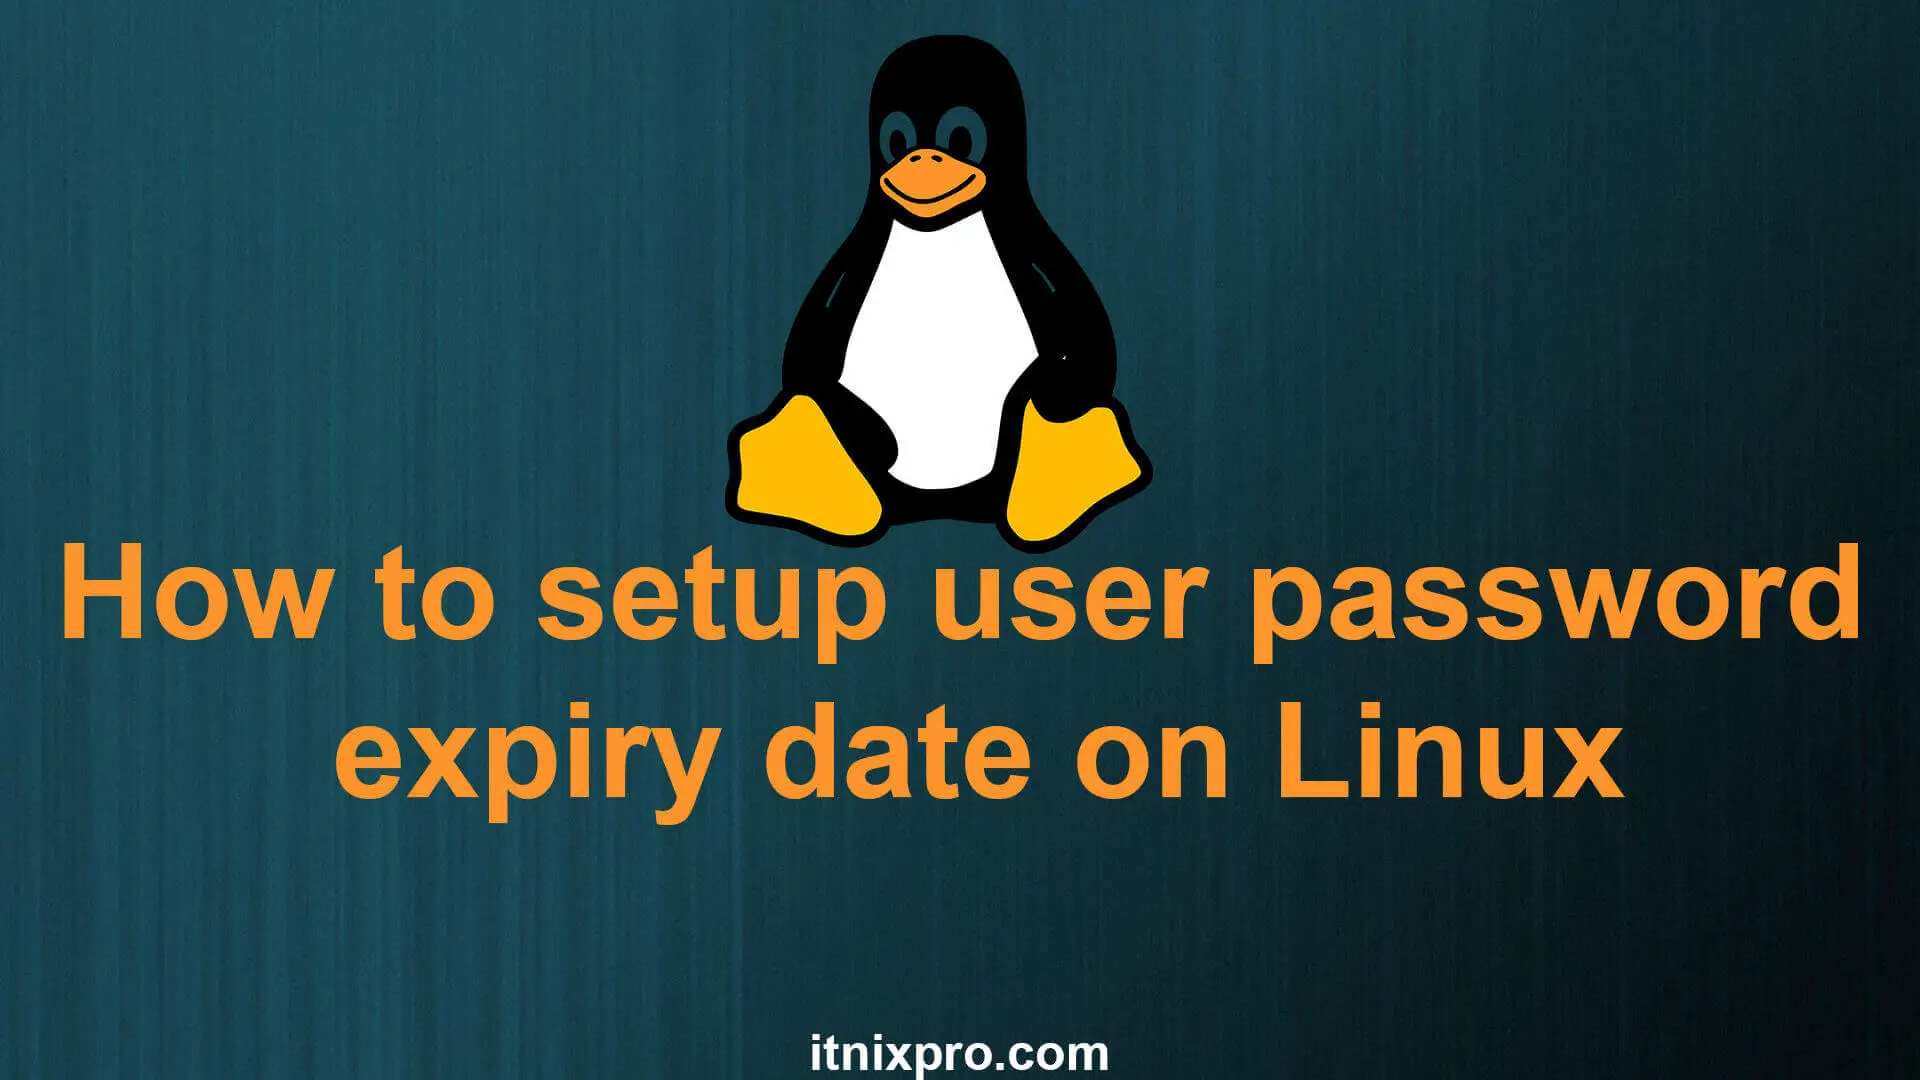 How to setup user password expiry date on Linux